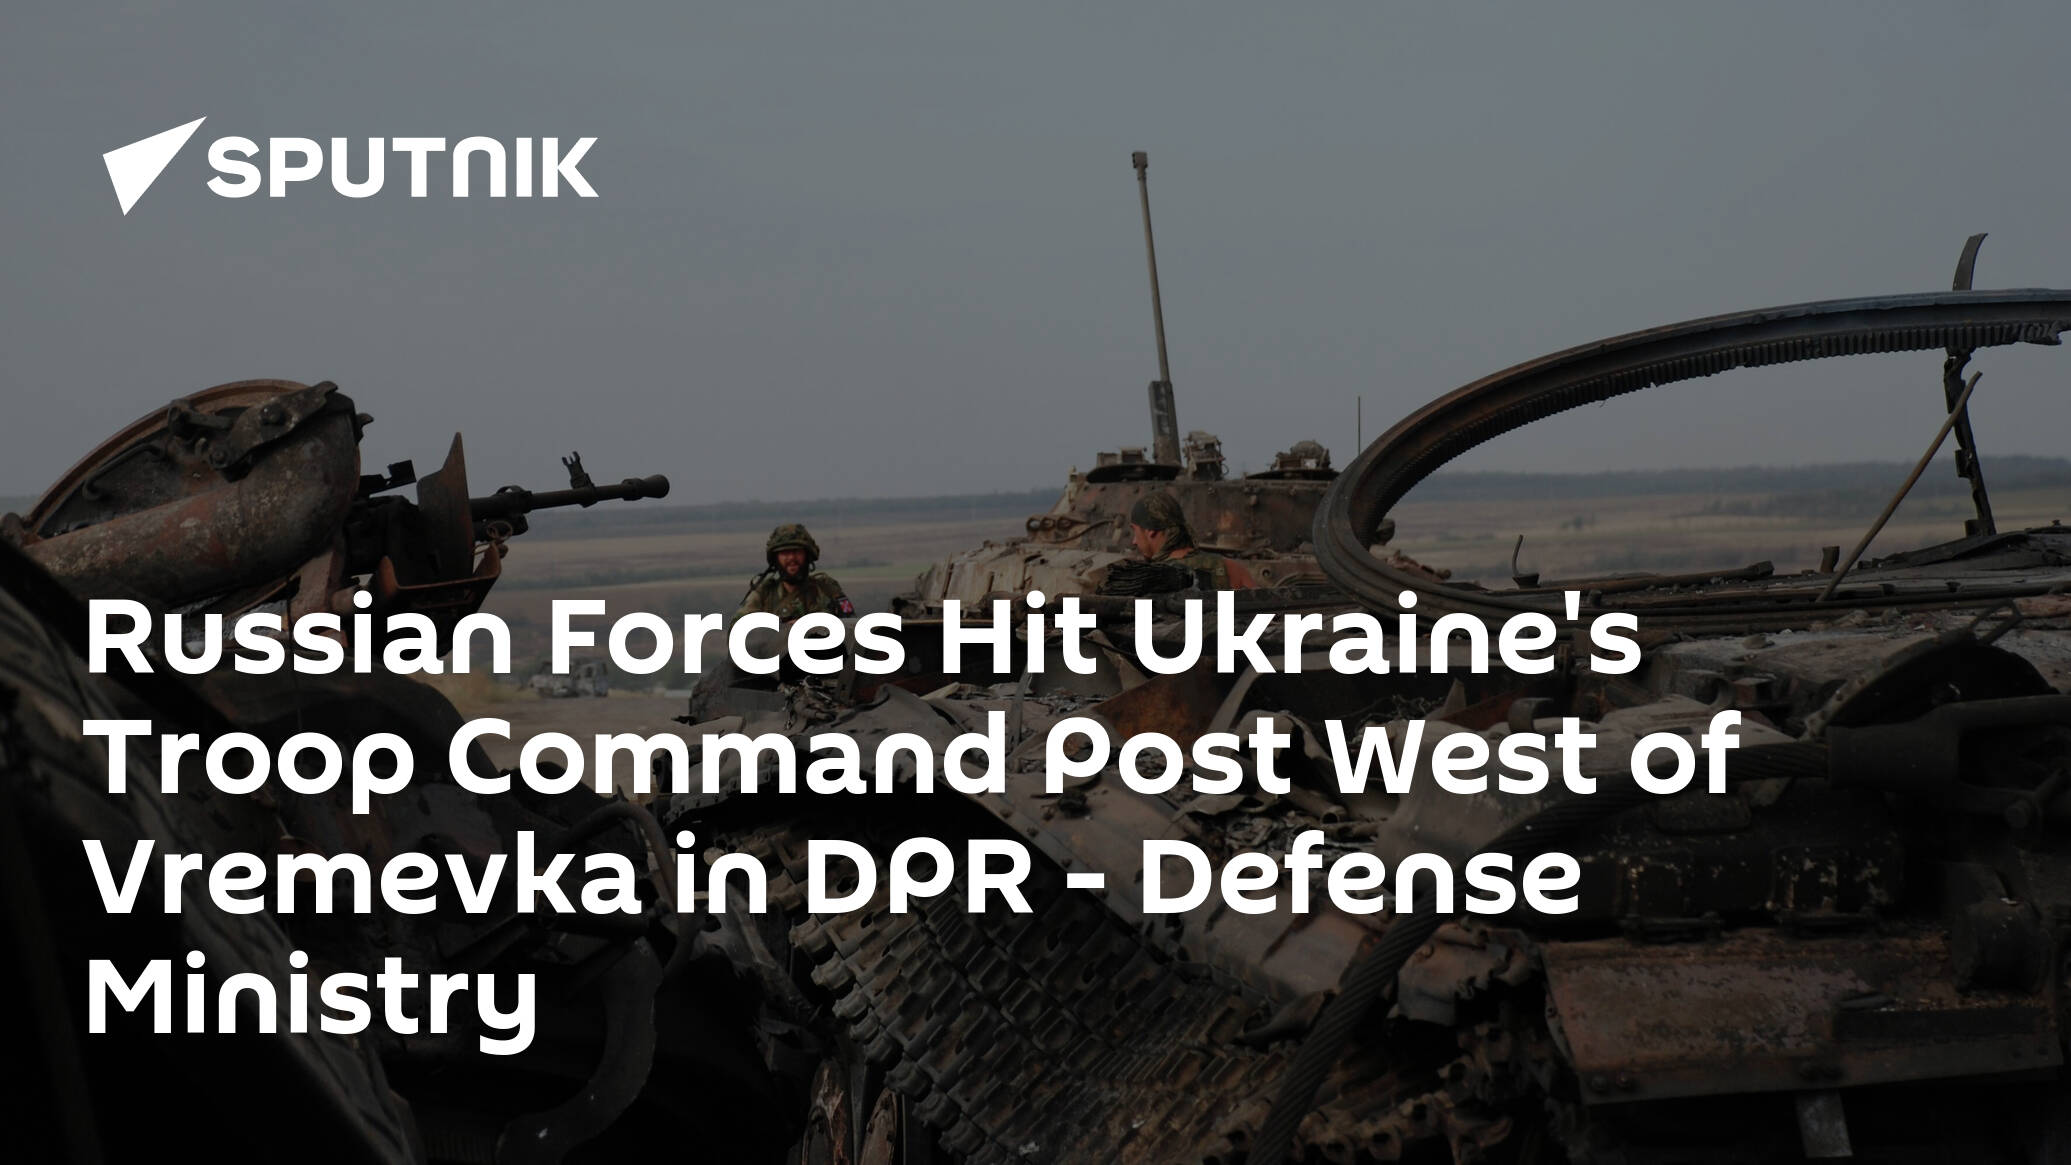 Russian Forces Hit Ukraine's Troop Command Post West of Vremyvka in DPR – Defense Ministry